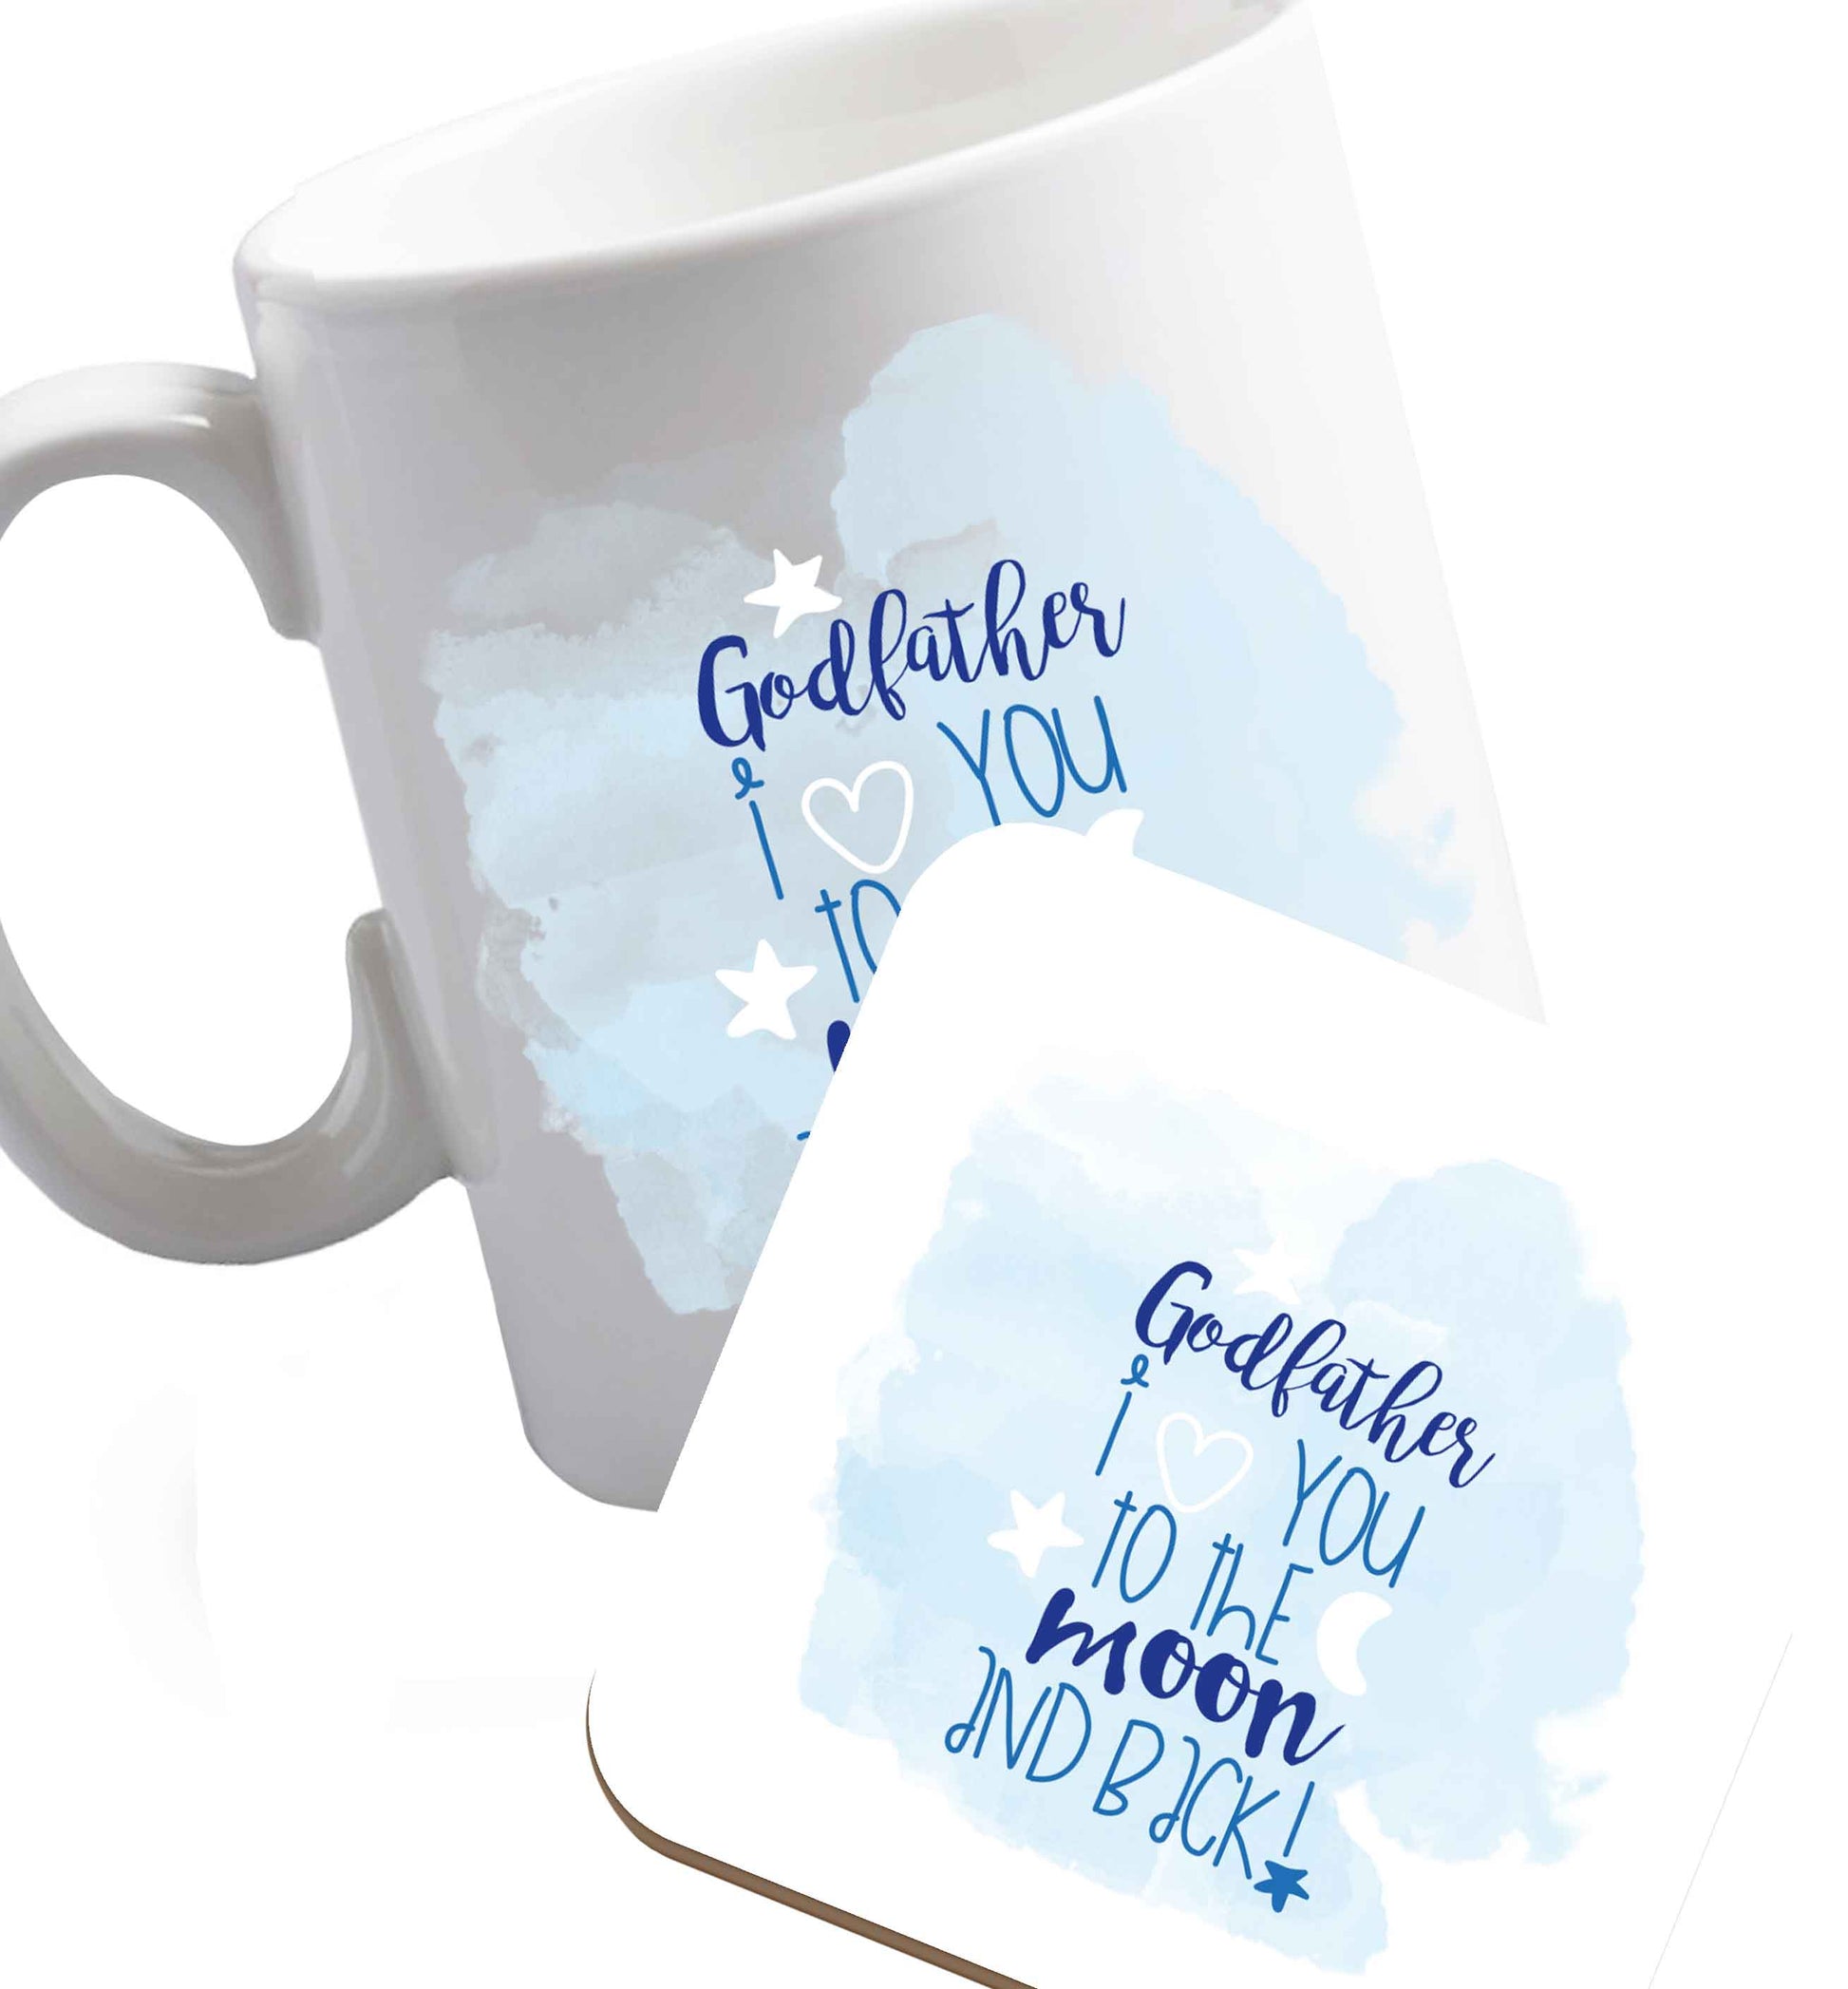 10 oz Godfather I love you to the moon and back  ceramic mug and coaster set right handed